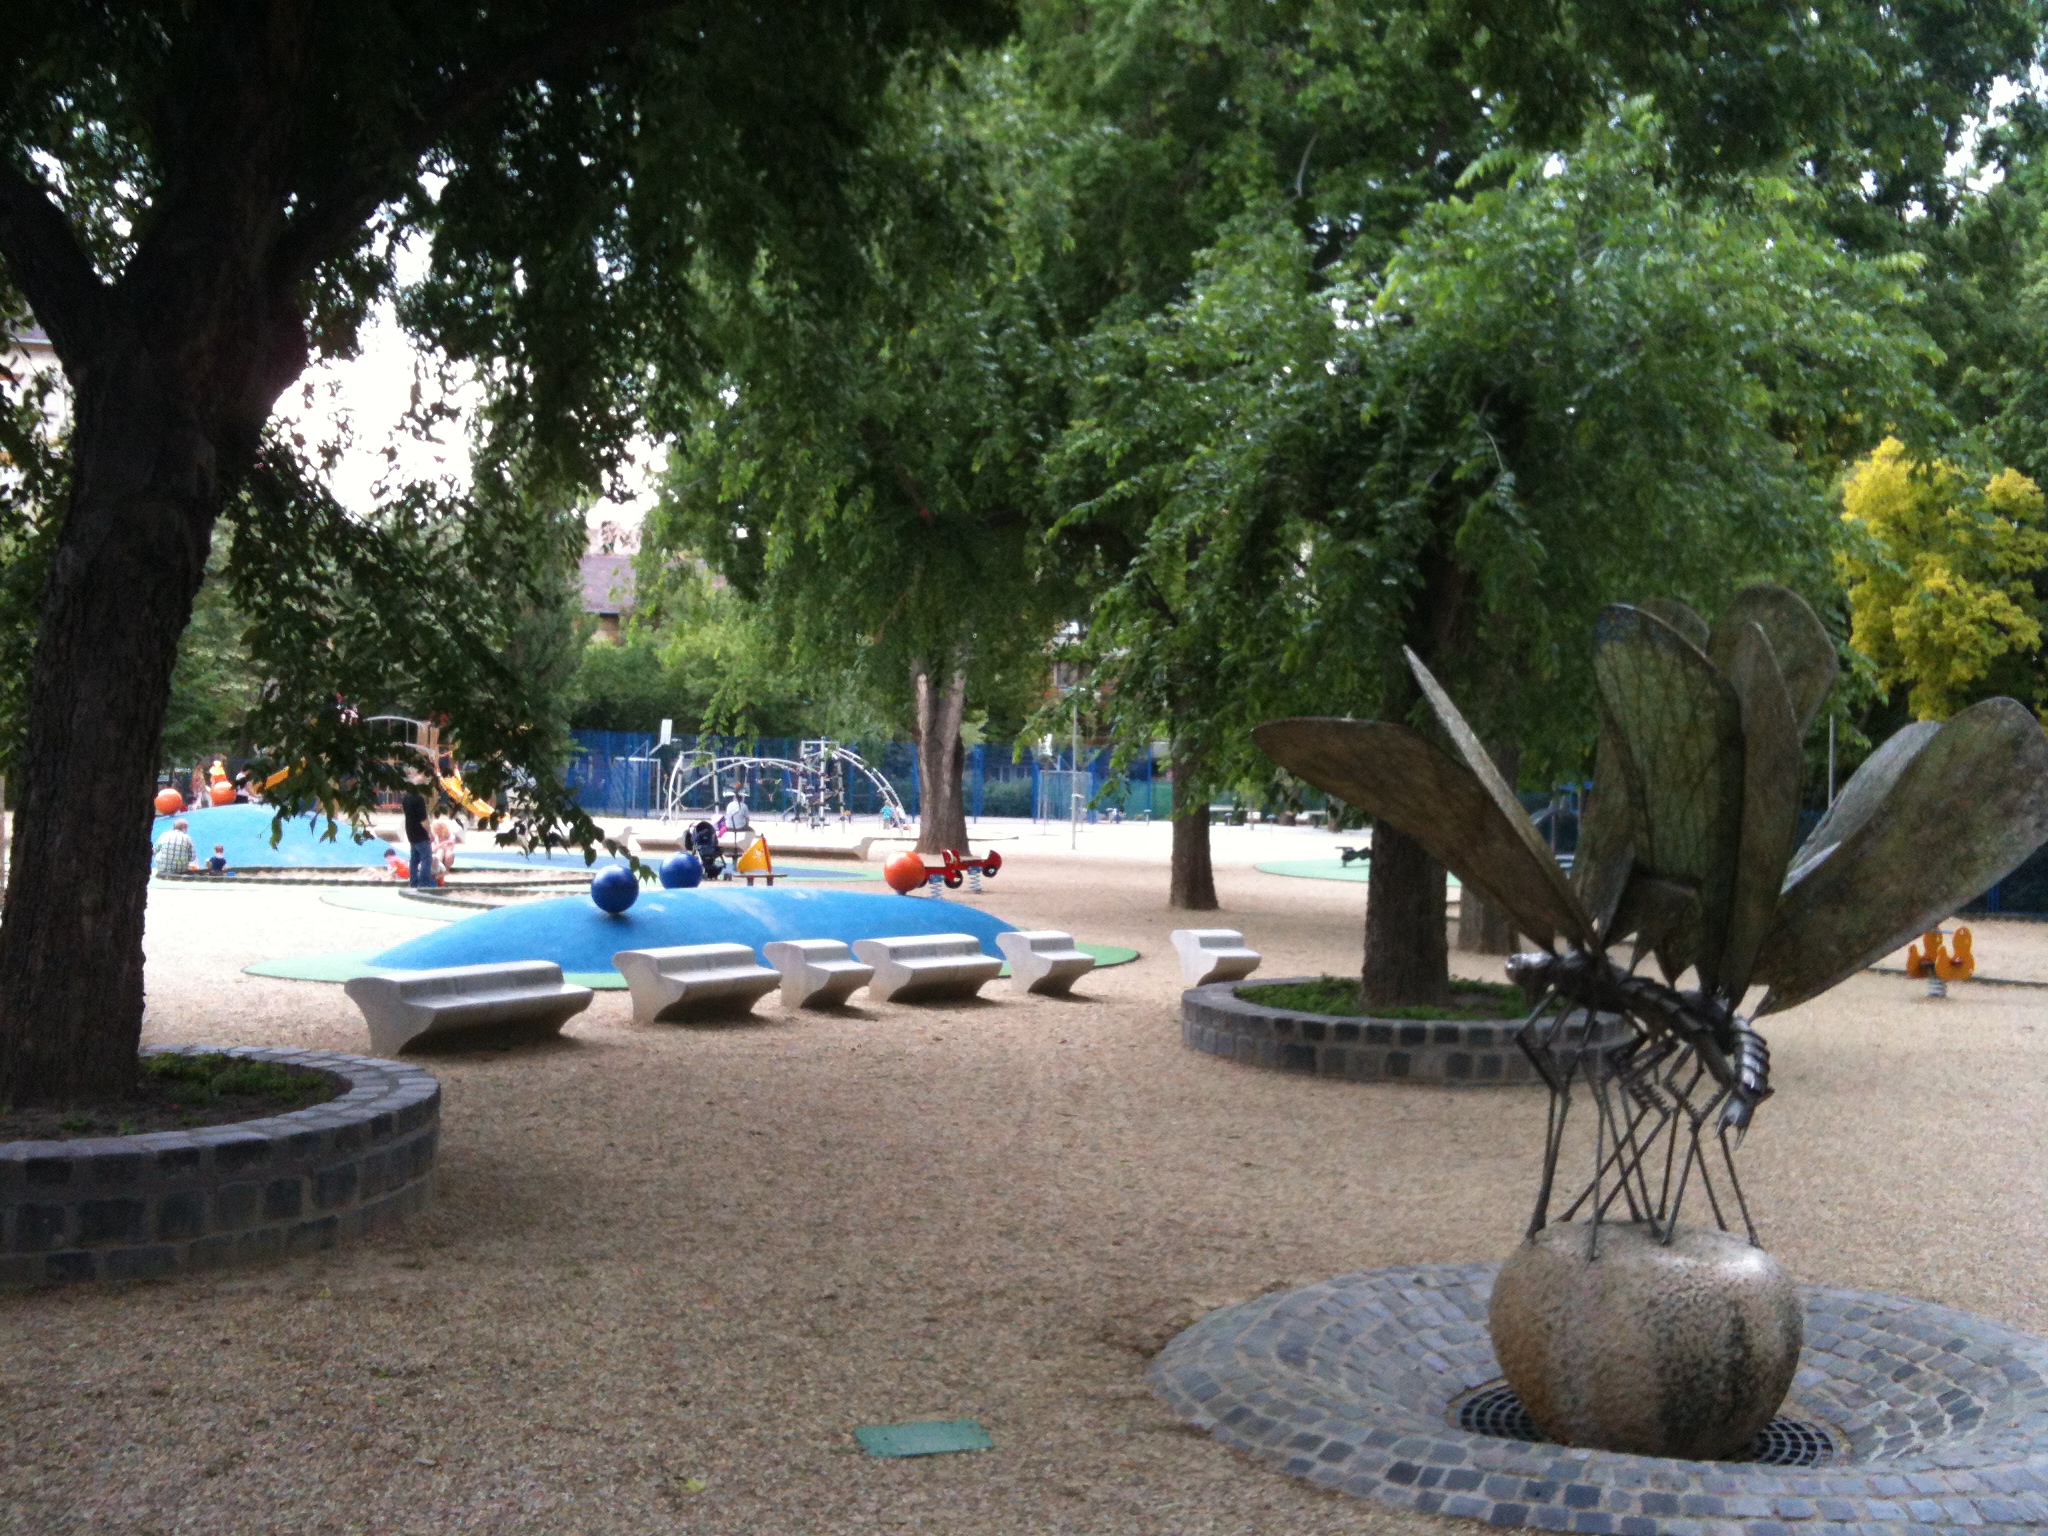 park with large sculptures and playground area with trees